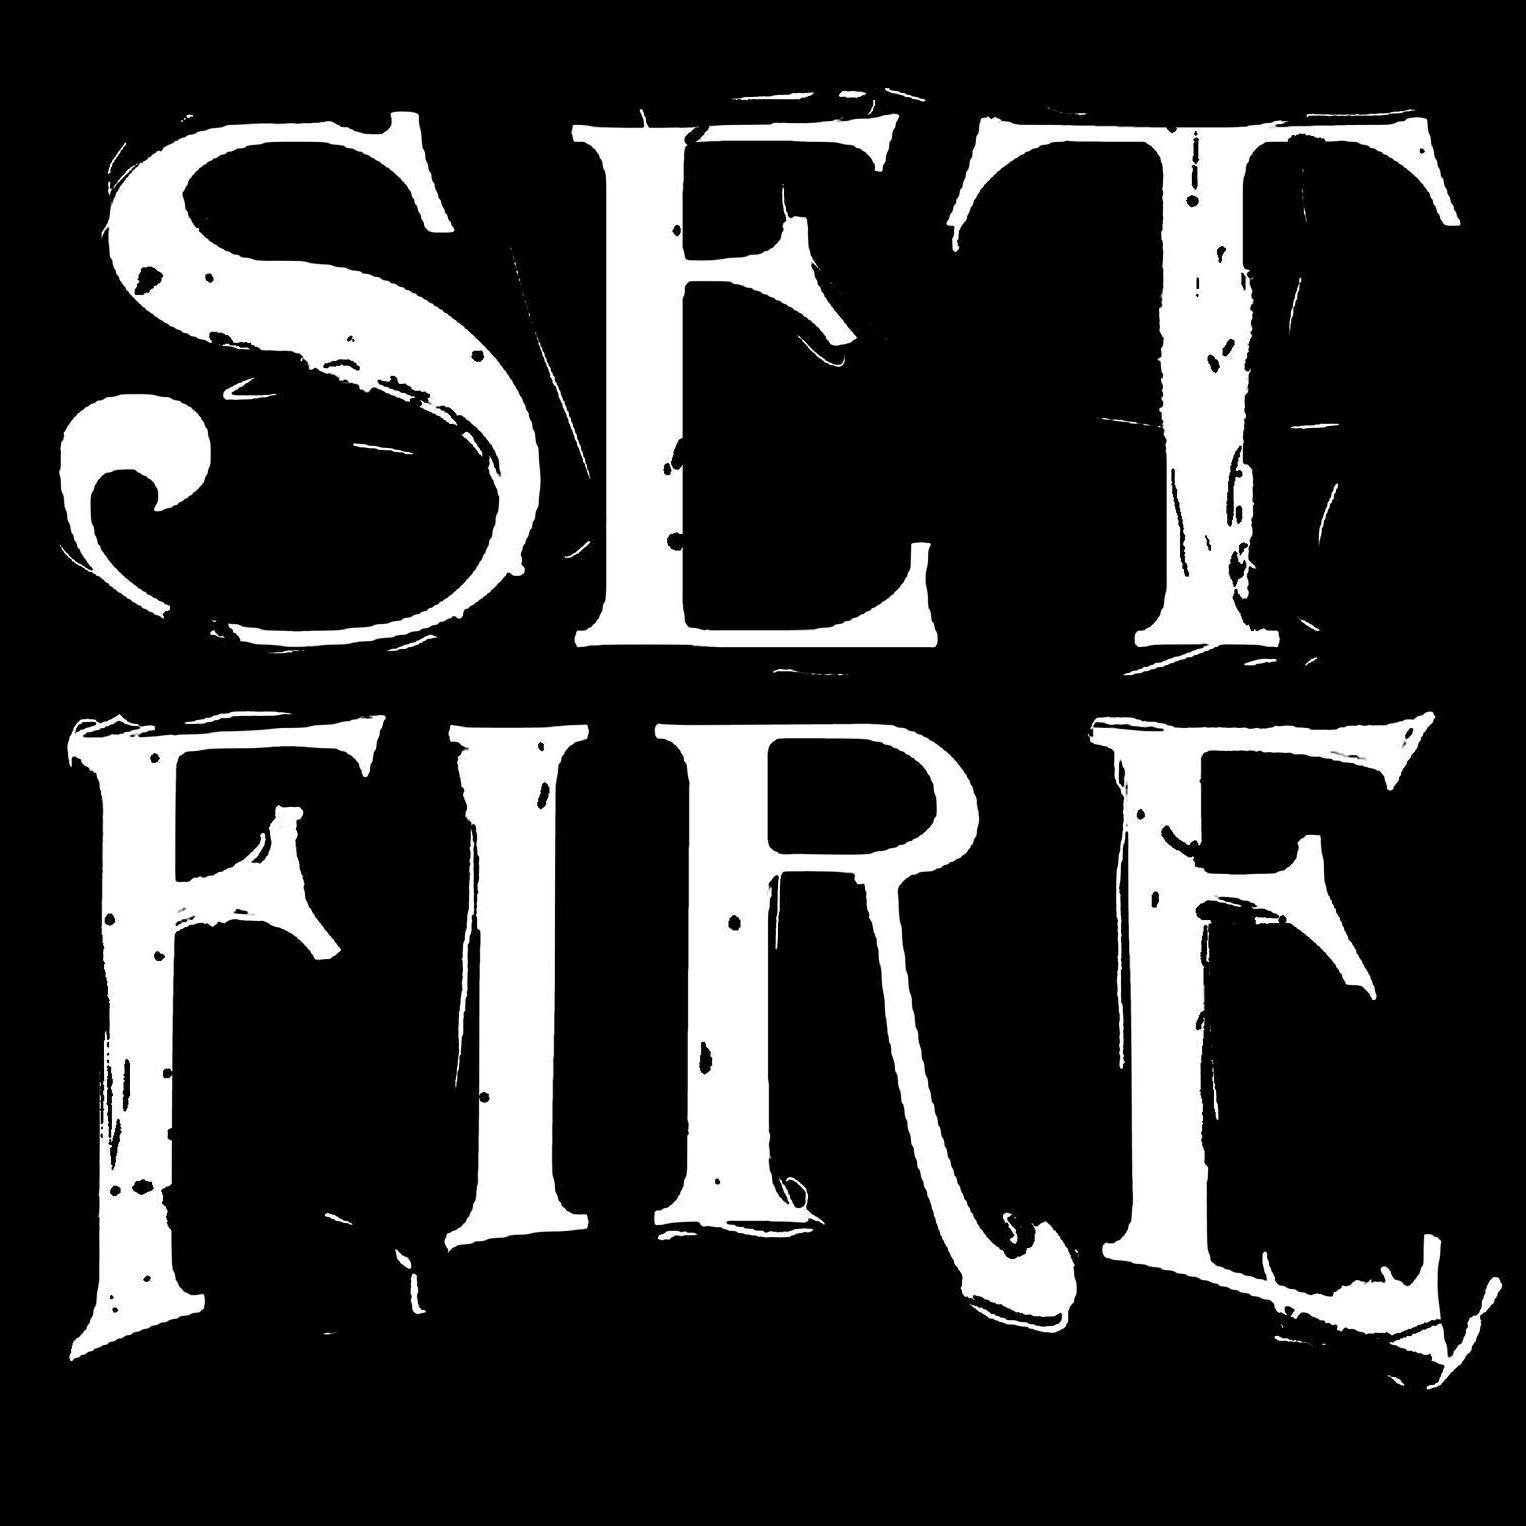 Set Fire is a rock band from Boston, MA.